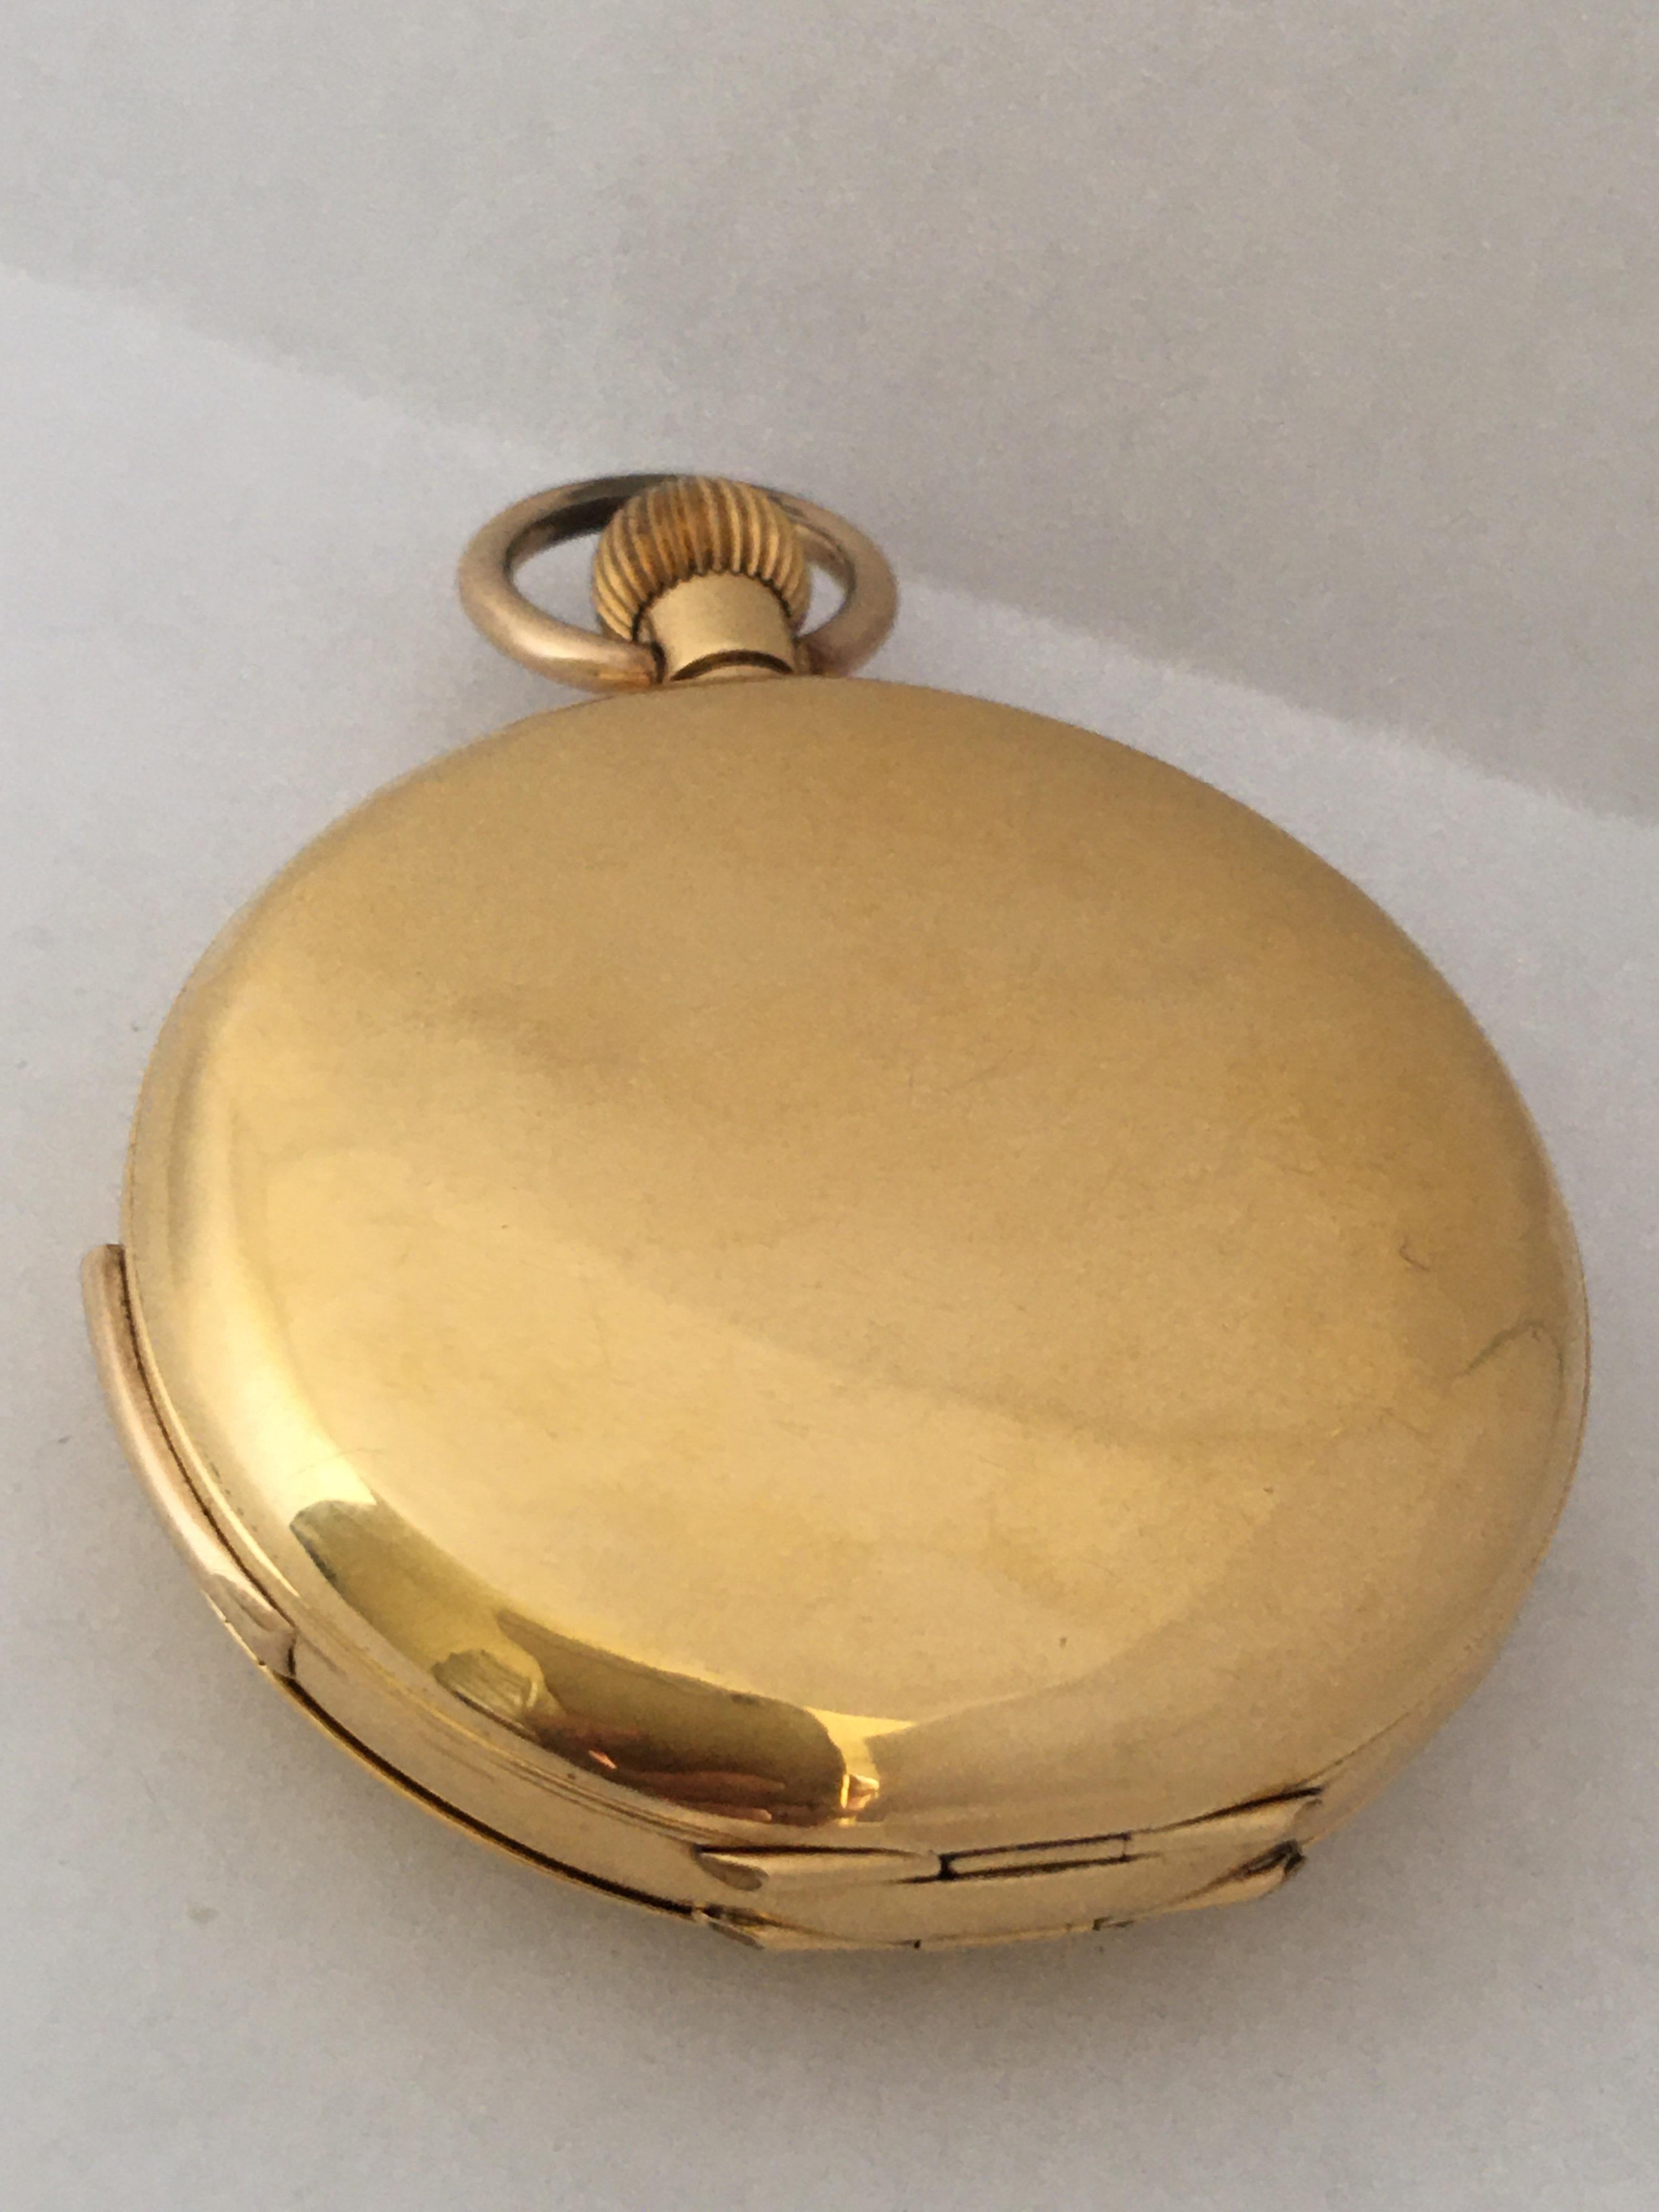 This beautiful pre-owned gold quarter repeating pocket watch is in full working order and it is running well. Visible signs of ageing and wear with small and light dents and scratches on the watch case as shown. 

Please study the images carefully